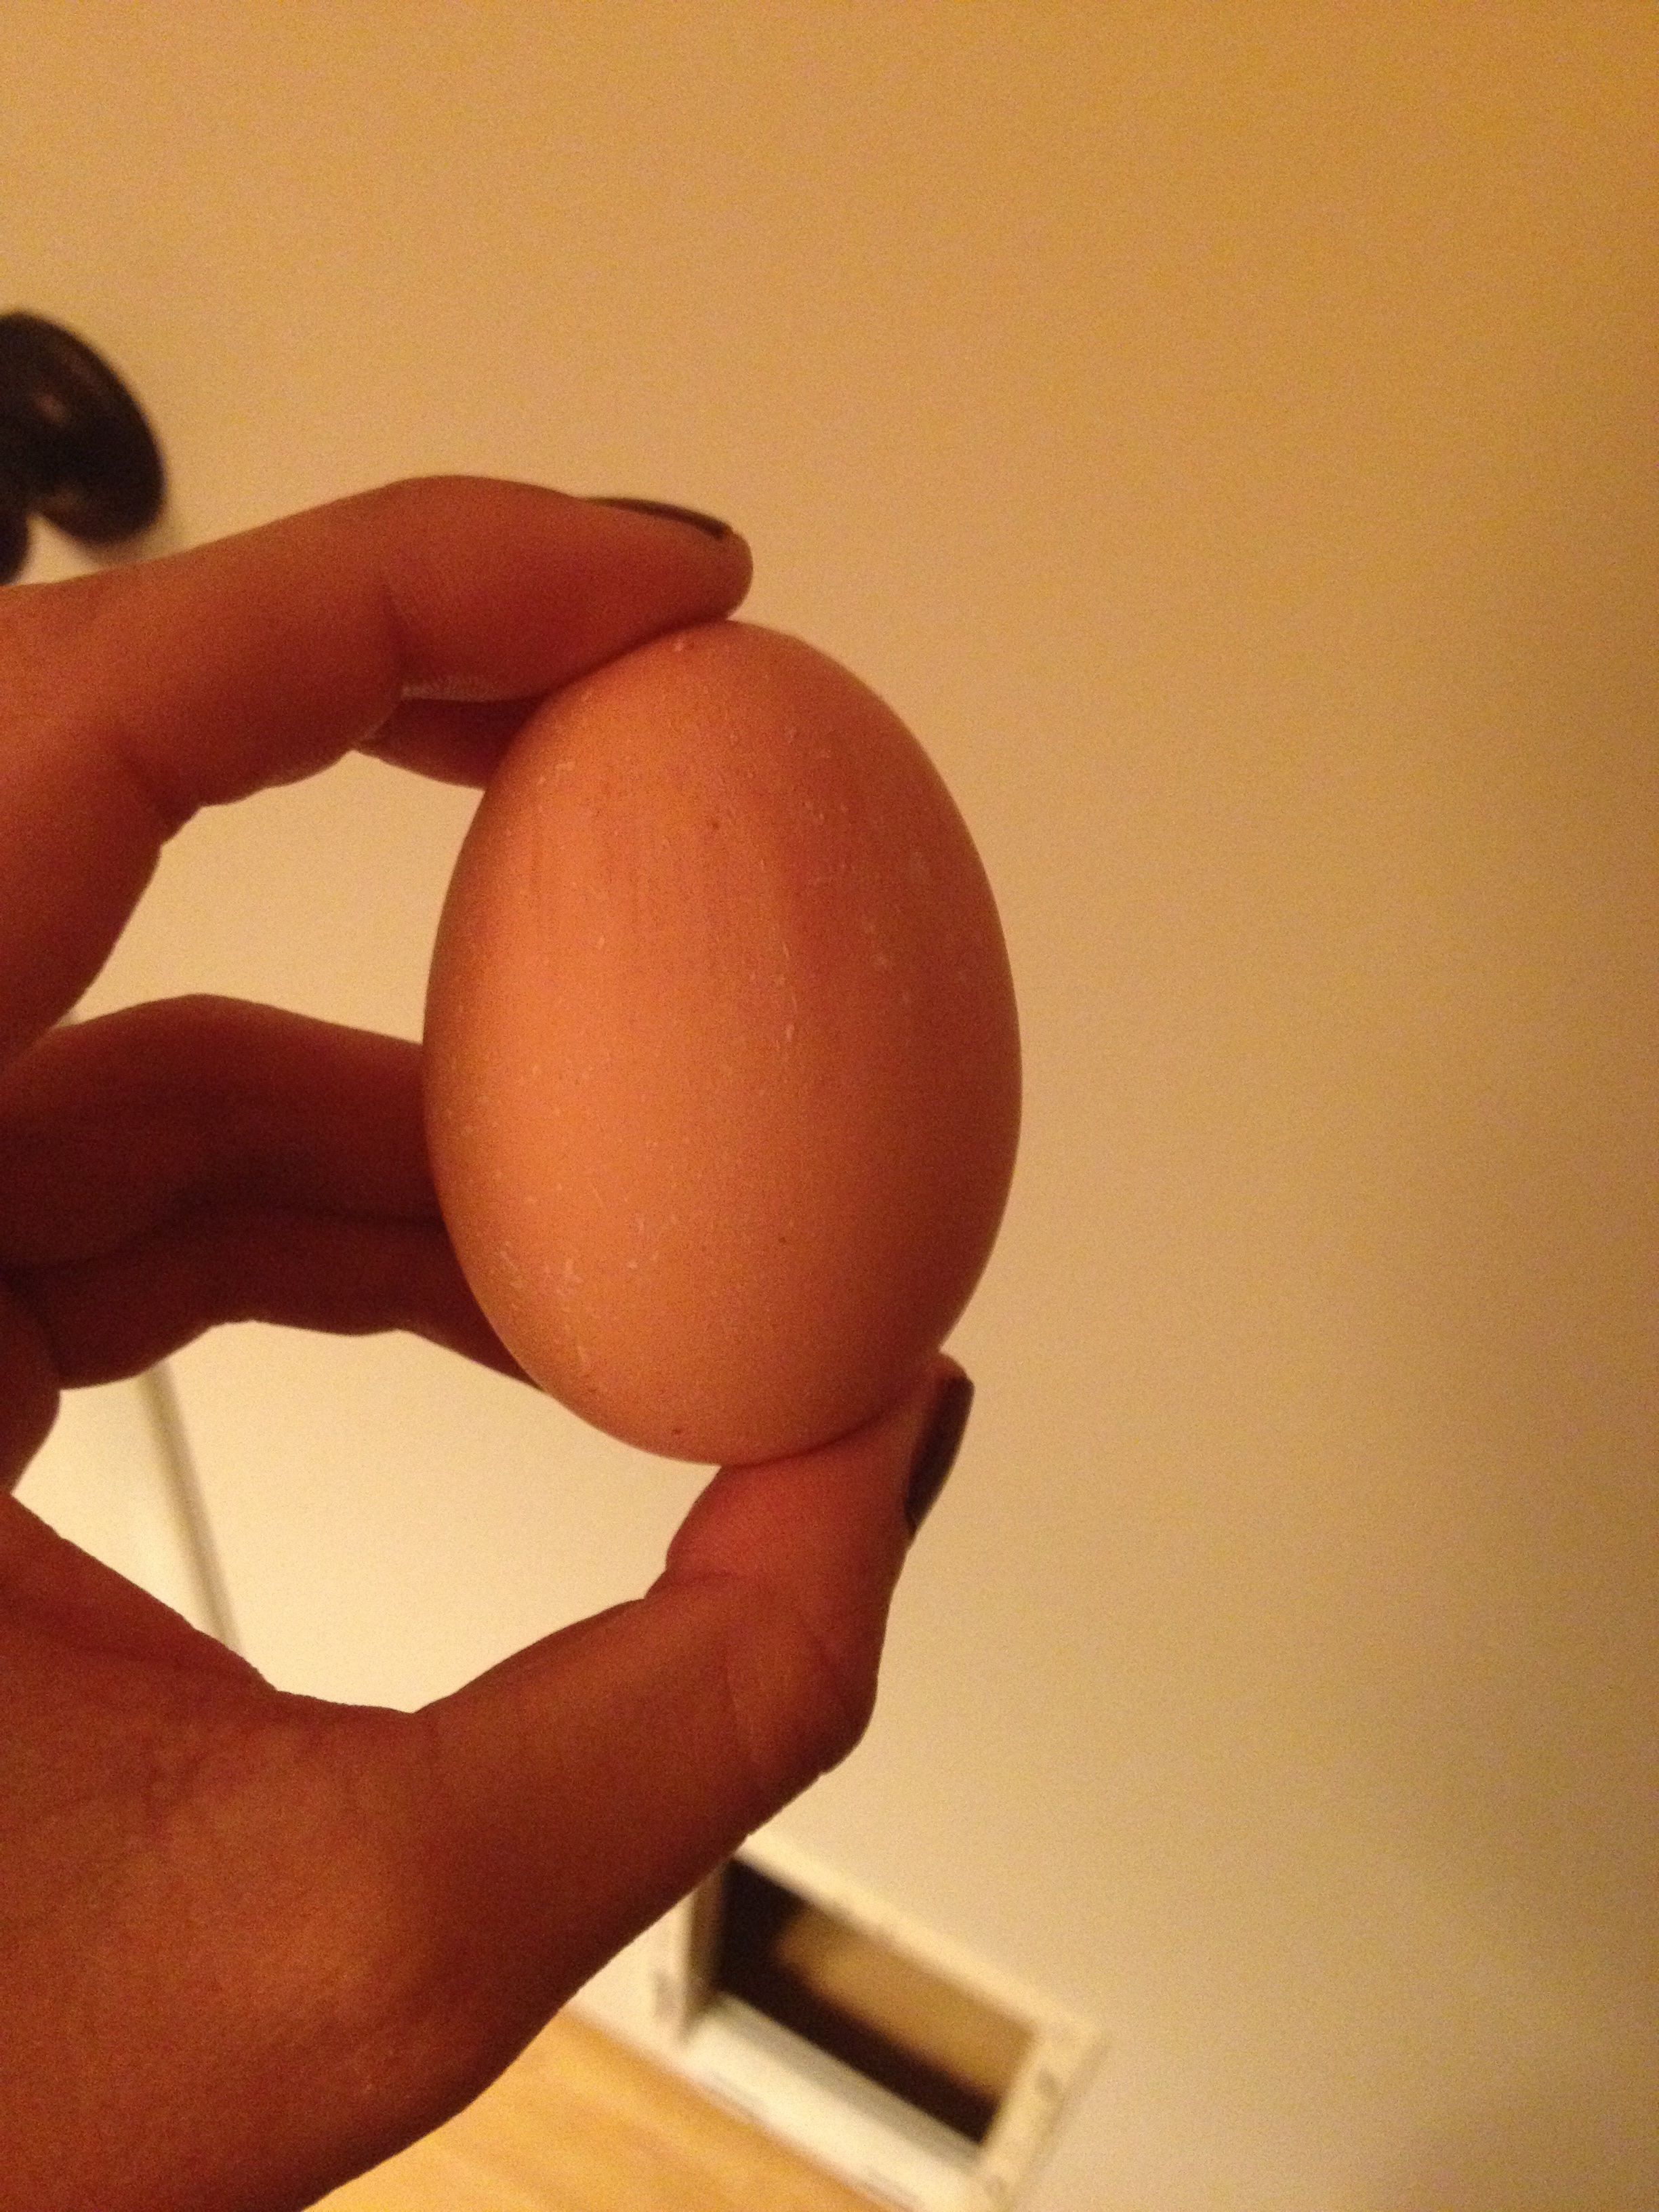 Our first egg! So excited!